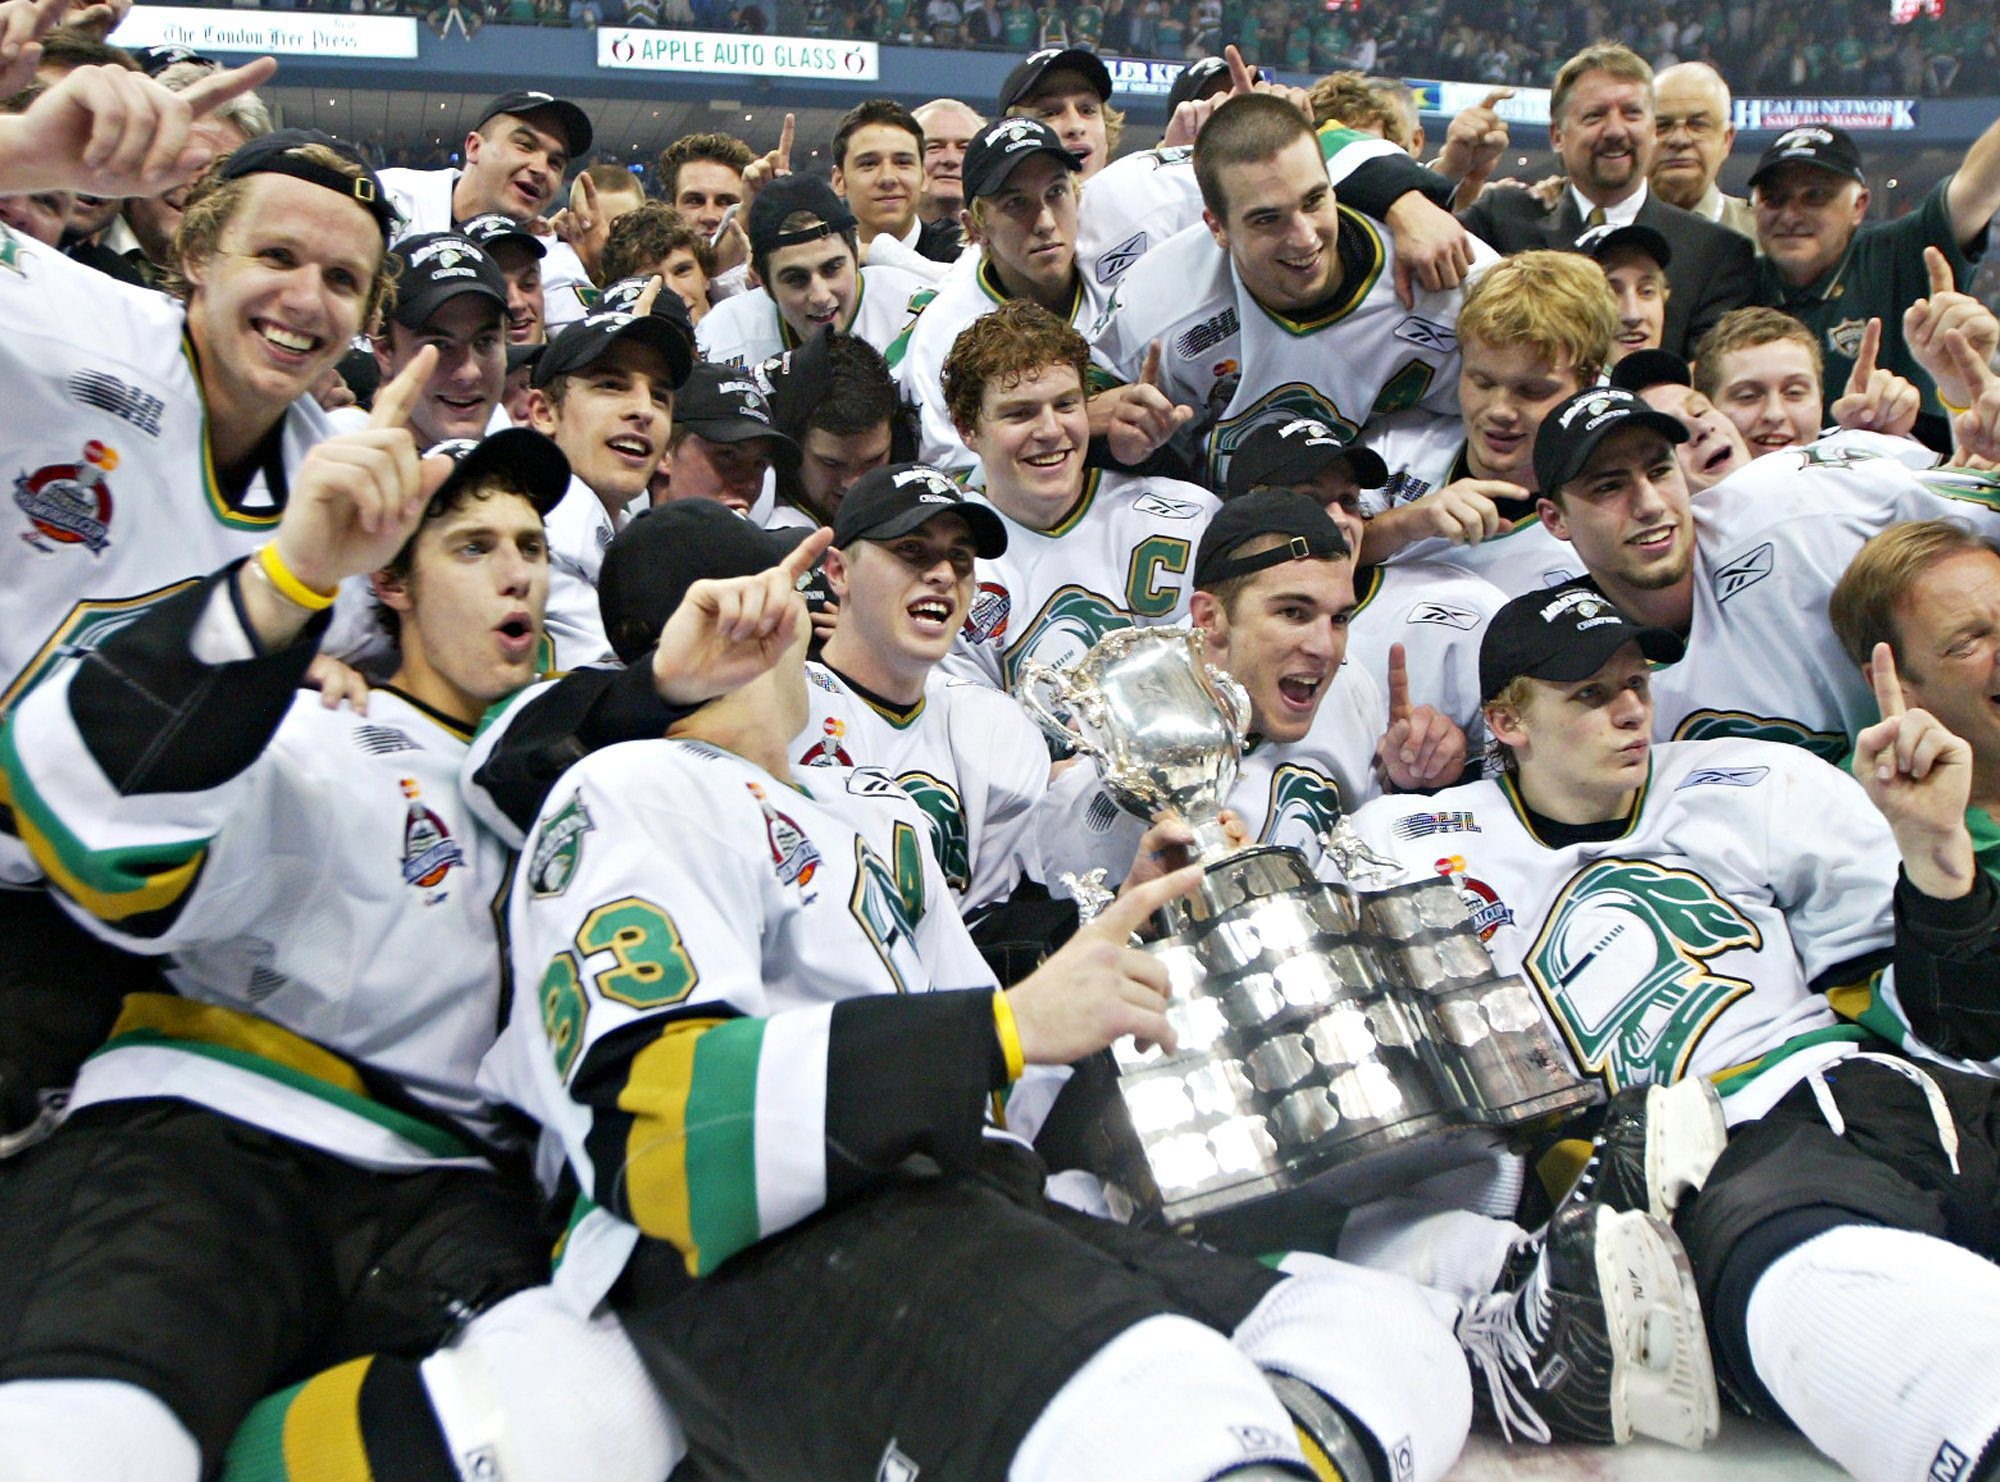 Contest to design London Knights' jersey